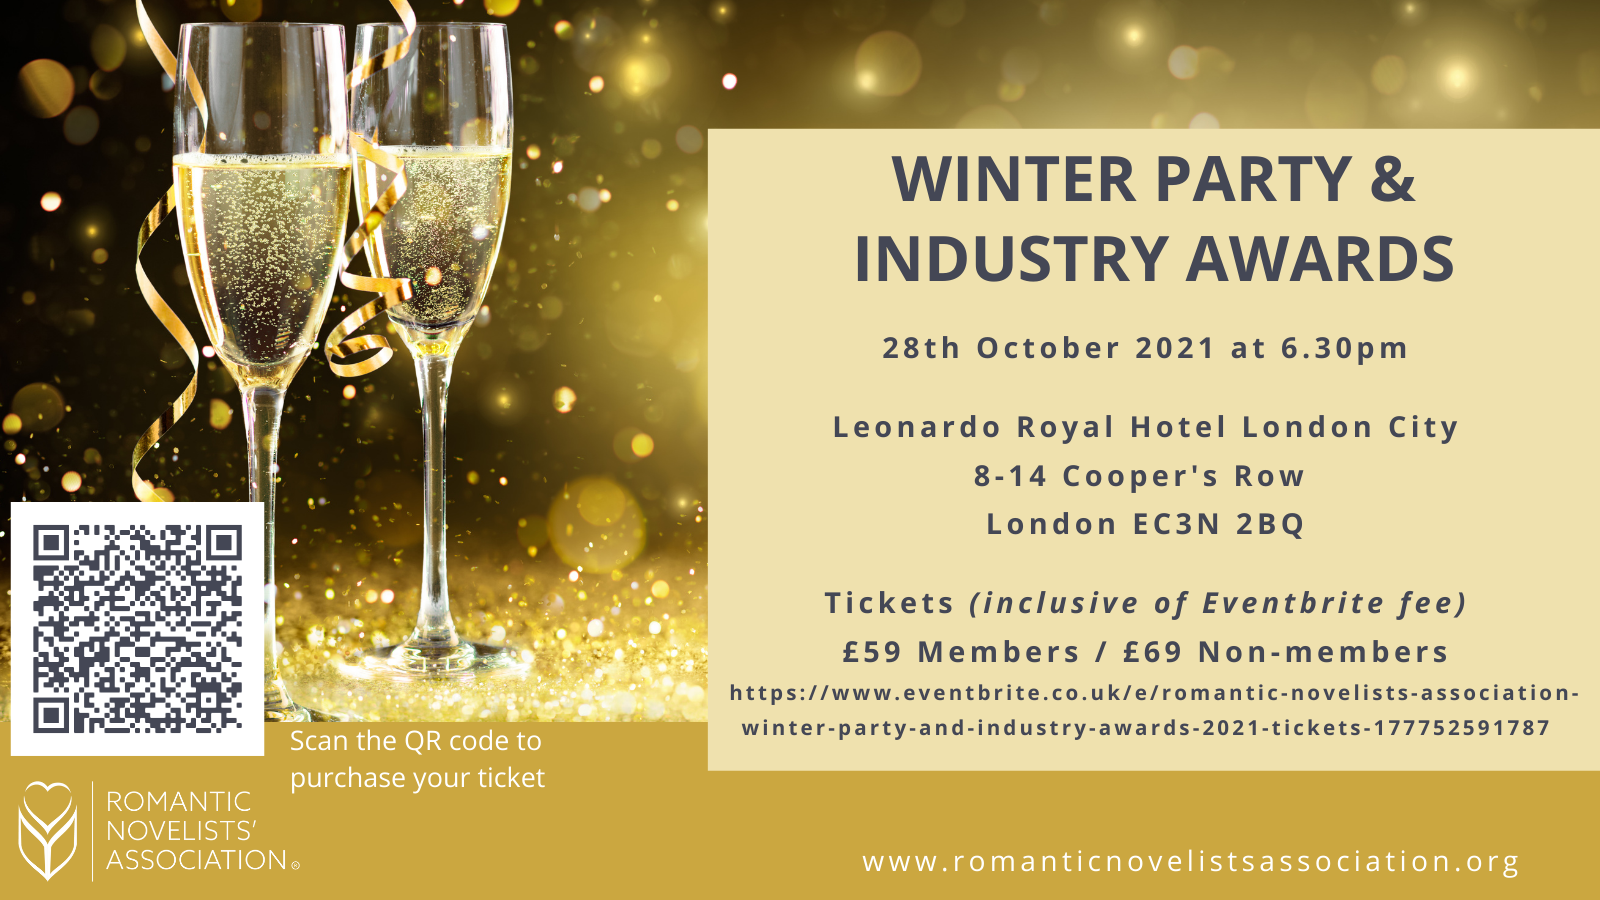 RNA Winter party and industry awards 2021